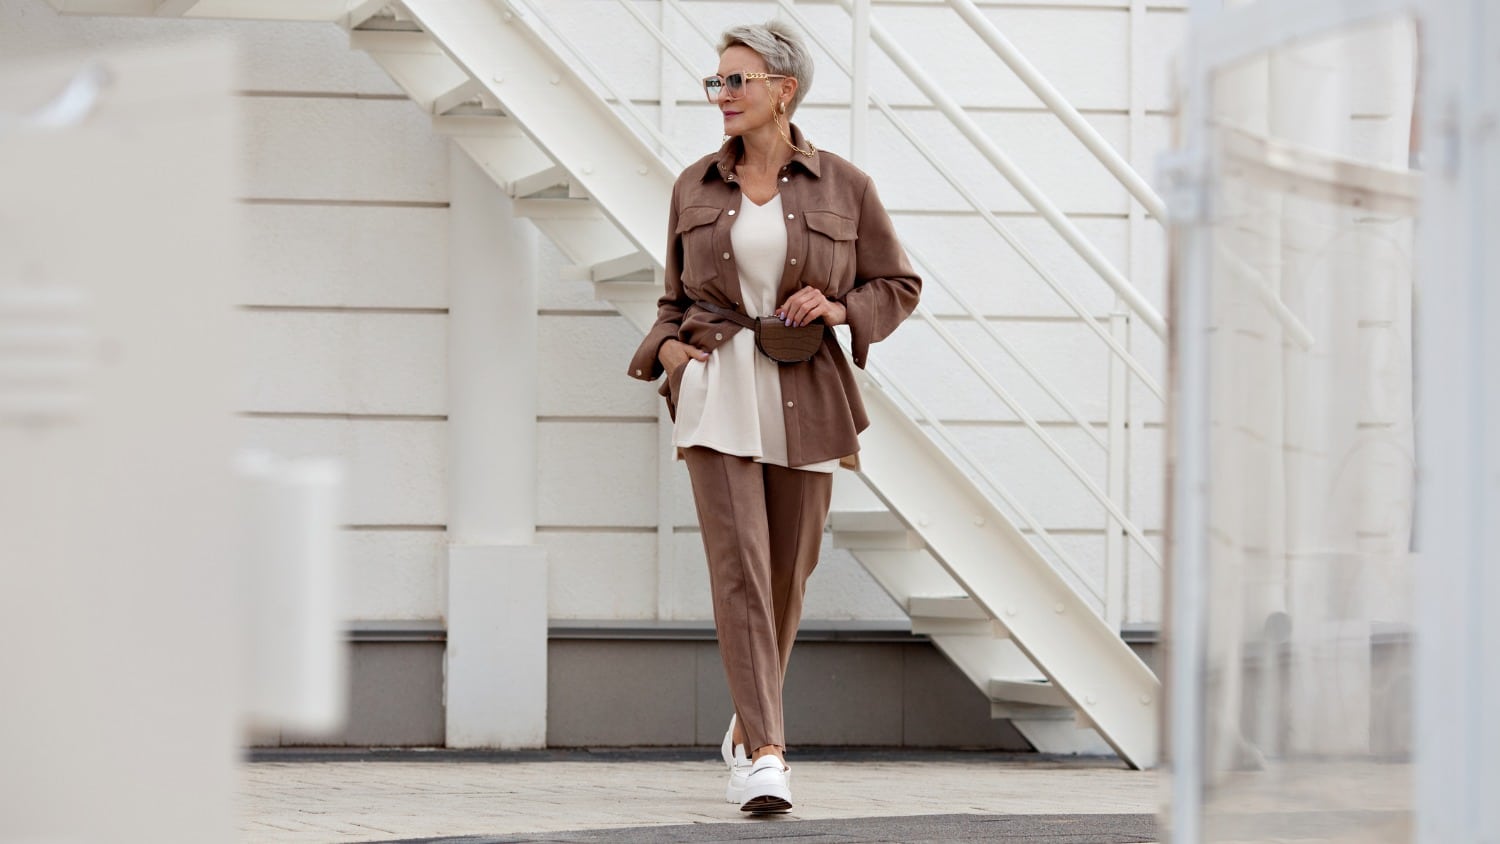 Trouser Suits For Women 2023: The best women's trouser suits to buy